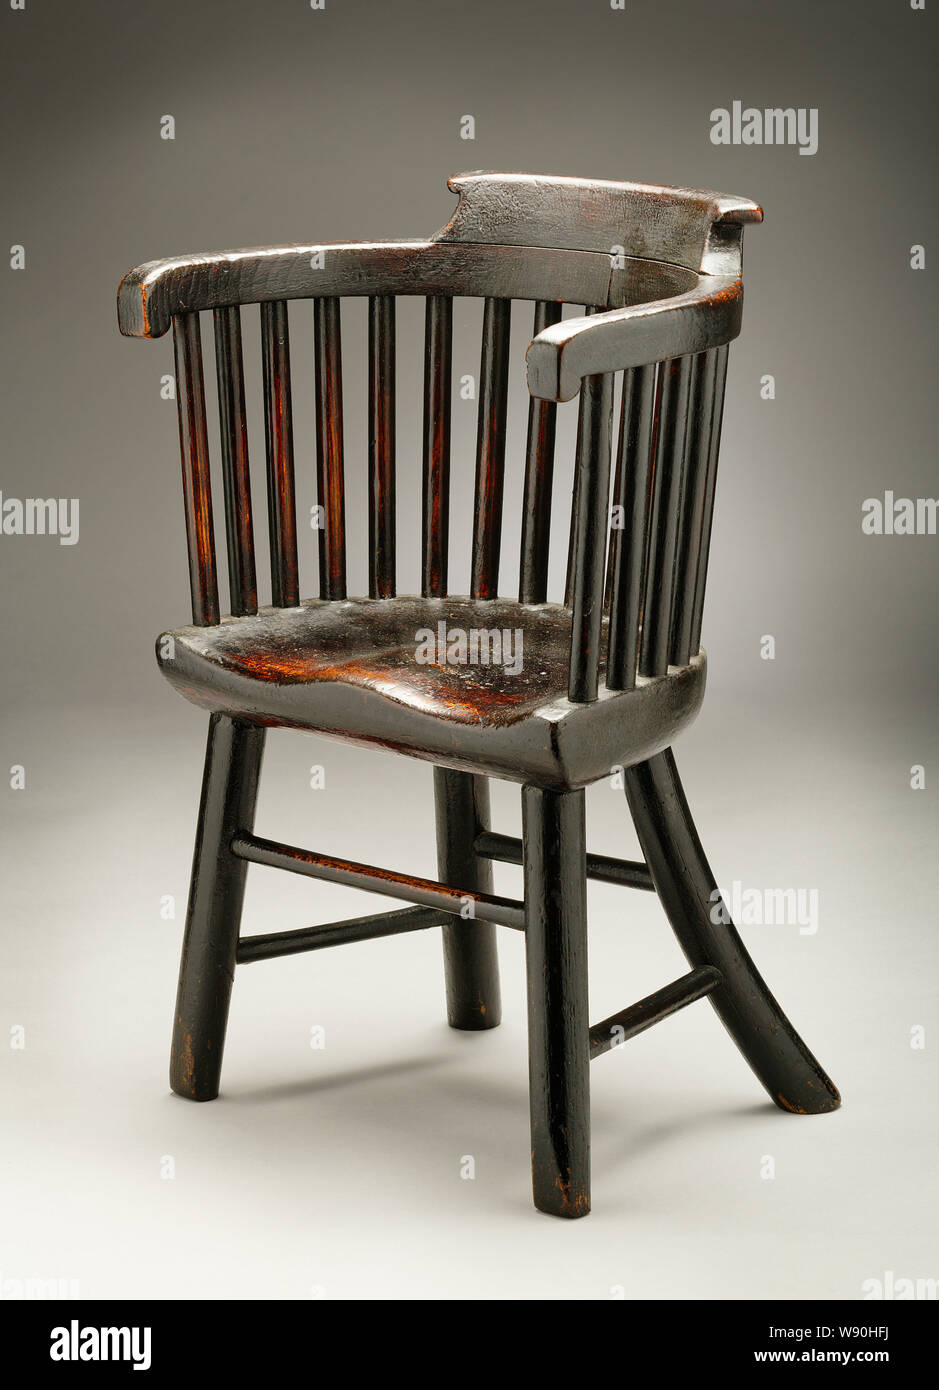 Old wooden childs' seat. Stock Photo